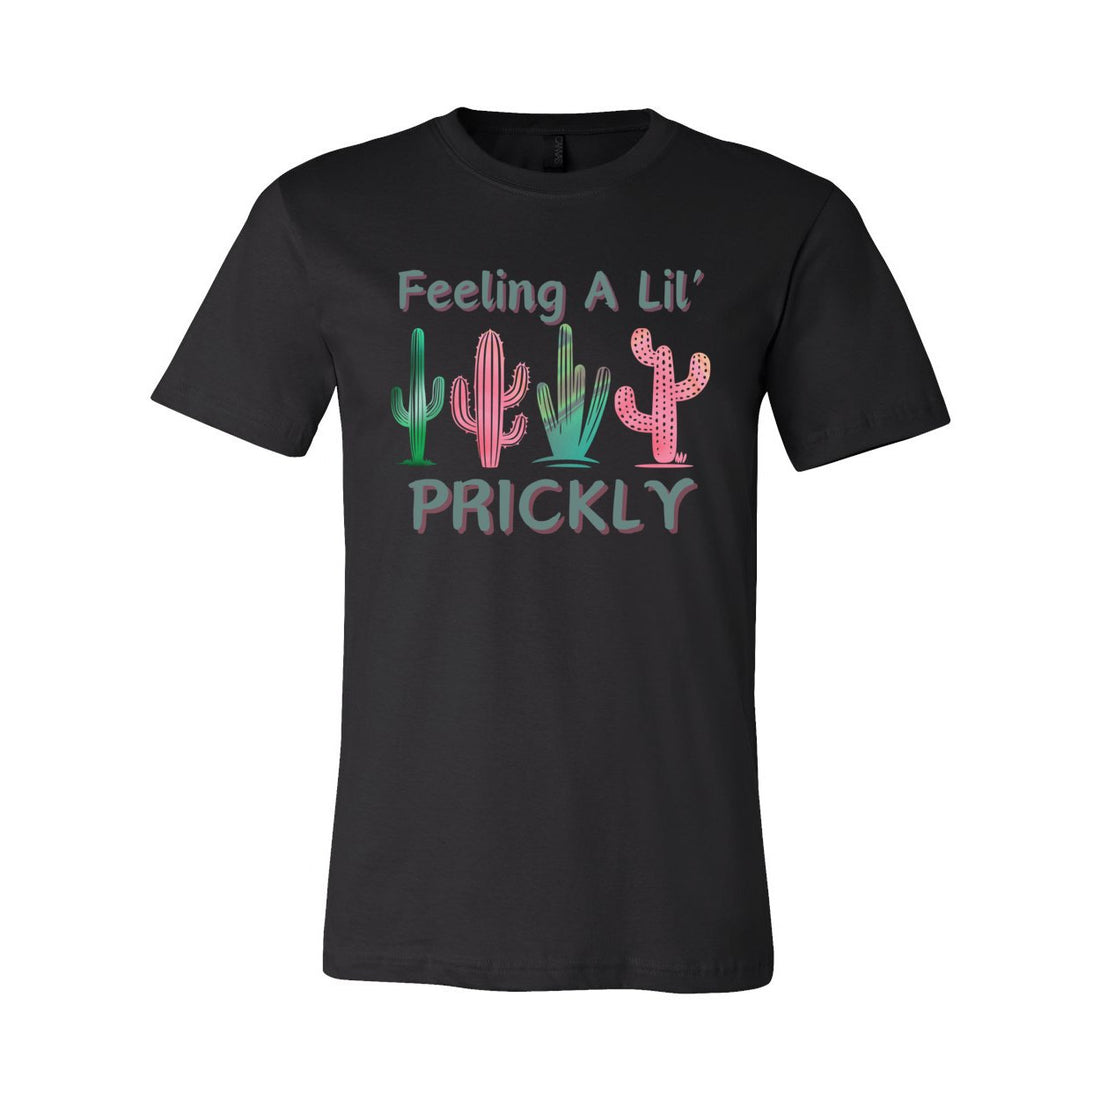 Feelin' A Lil' Prickly Jersey Tee - T-Shirts - Positively Sassy - Feelin' A Lil' Prickly Jersey Tee